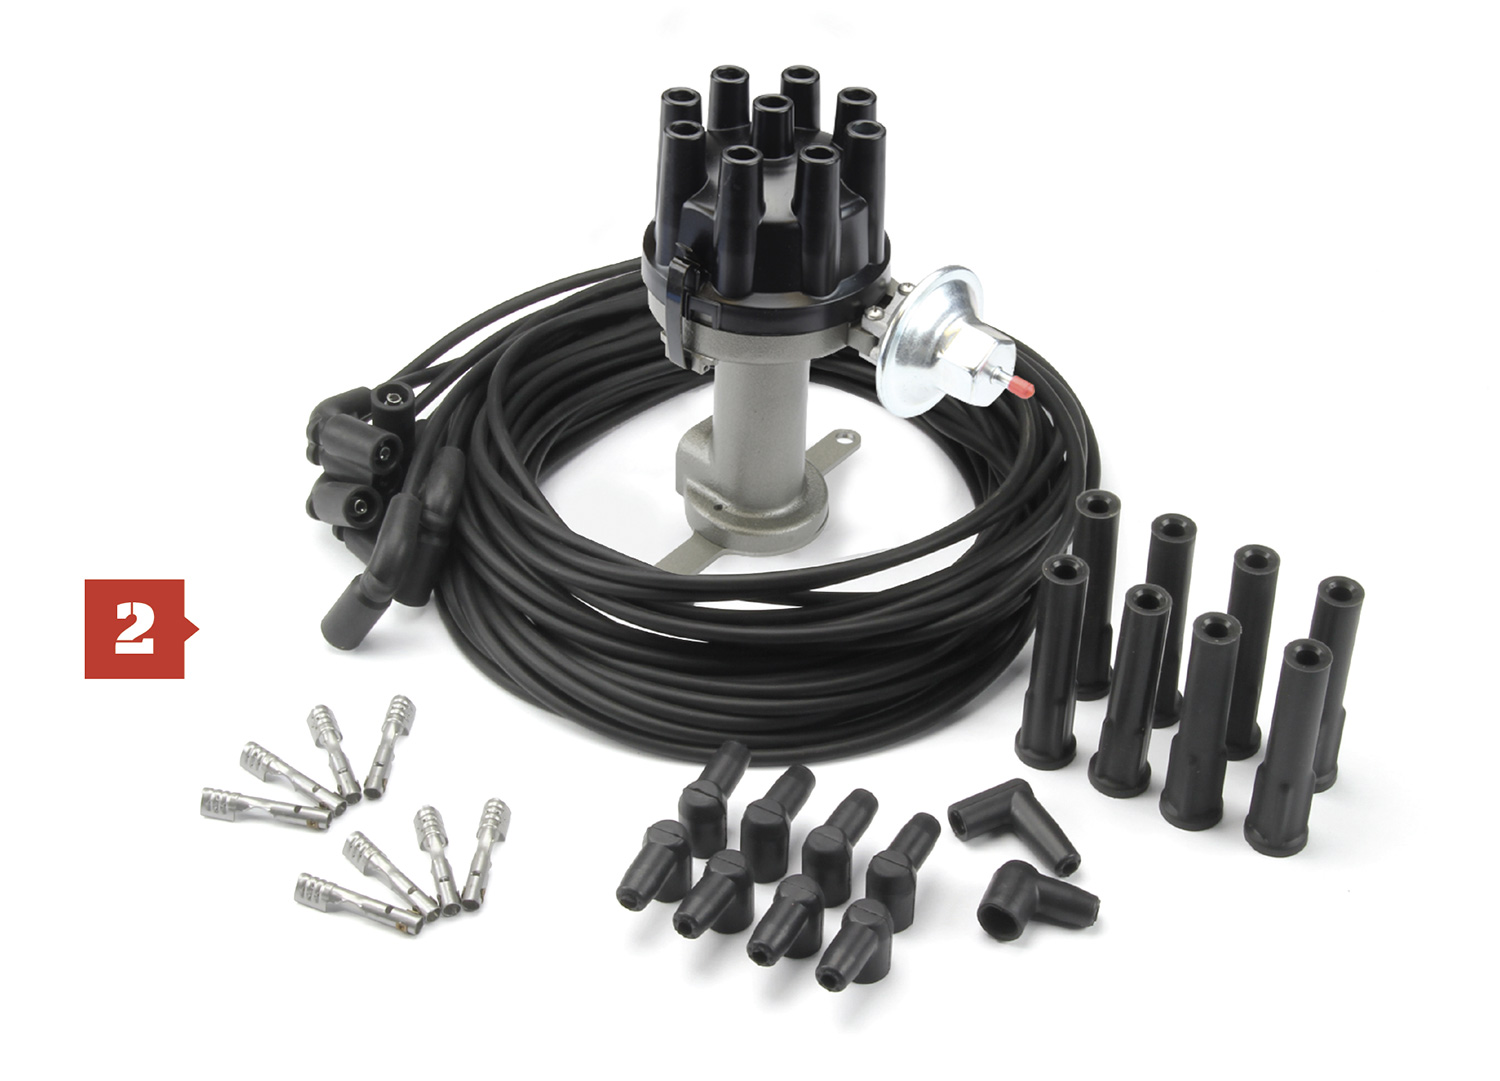 Lokar's LS Classic Series Ford-style Simulated Distributor and Plug Wire Set